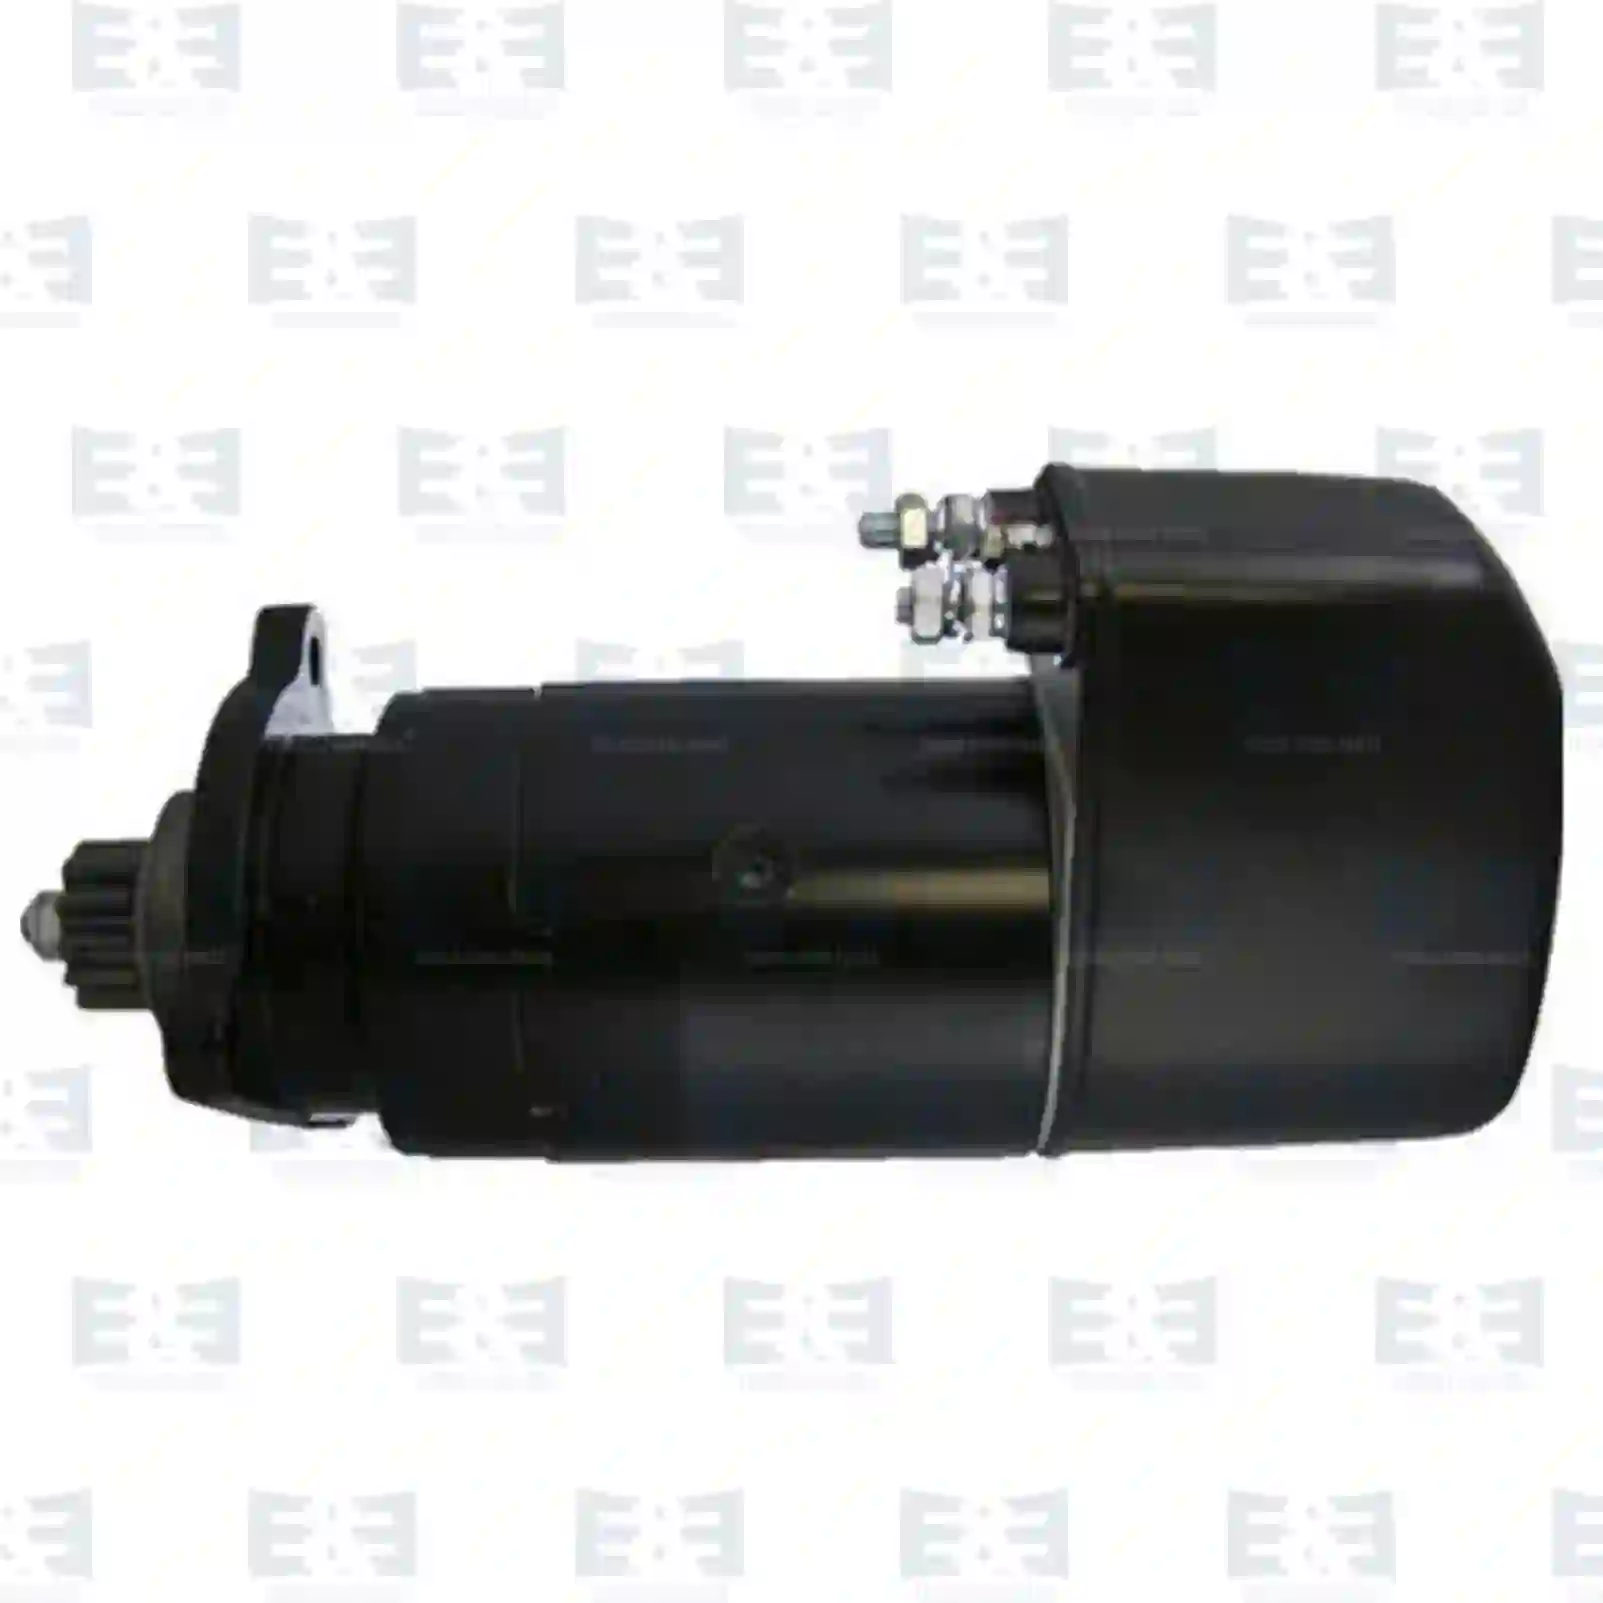 Starter Motor Starter, EE No 2E2290019 ,  oem no:2T-0797, 3T-2646, 3T-2650, 6N-1886, 3103914, 3675294, 4005889, 4040318, 004780974, 1547049, 20451445, 20536466, 3095060, 3964839, 8112615, 8113165, 8113918, 85000186, 85006186, ZG20933-0008 E&E Truck Spare Parts | Truck Spare Parts, Auotomotive Spare Parts